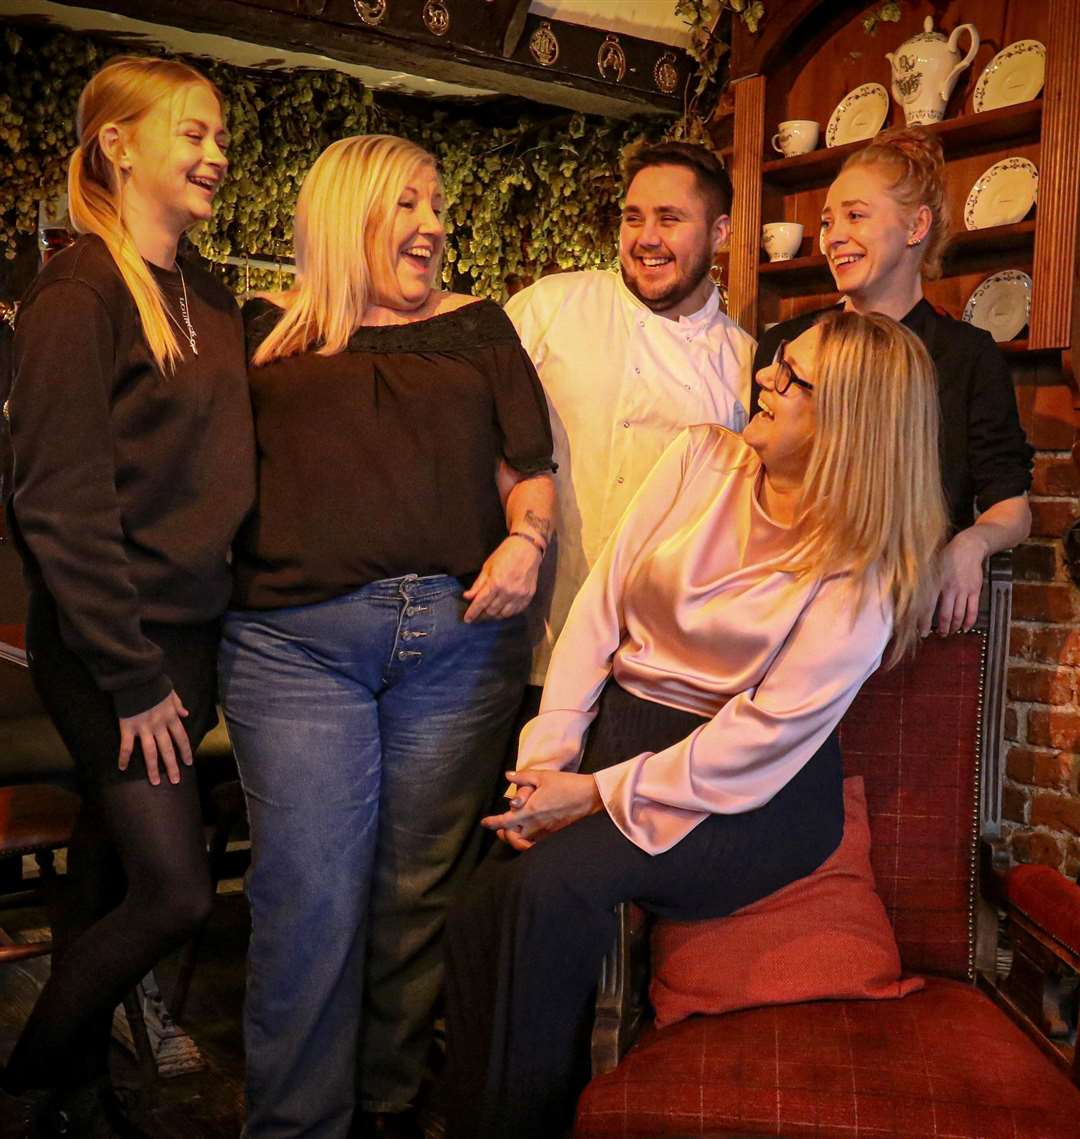 The pub landlord says she has 'the best group of staff'. Picture: Lisa Burton